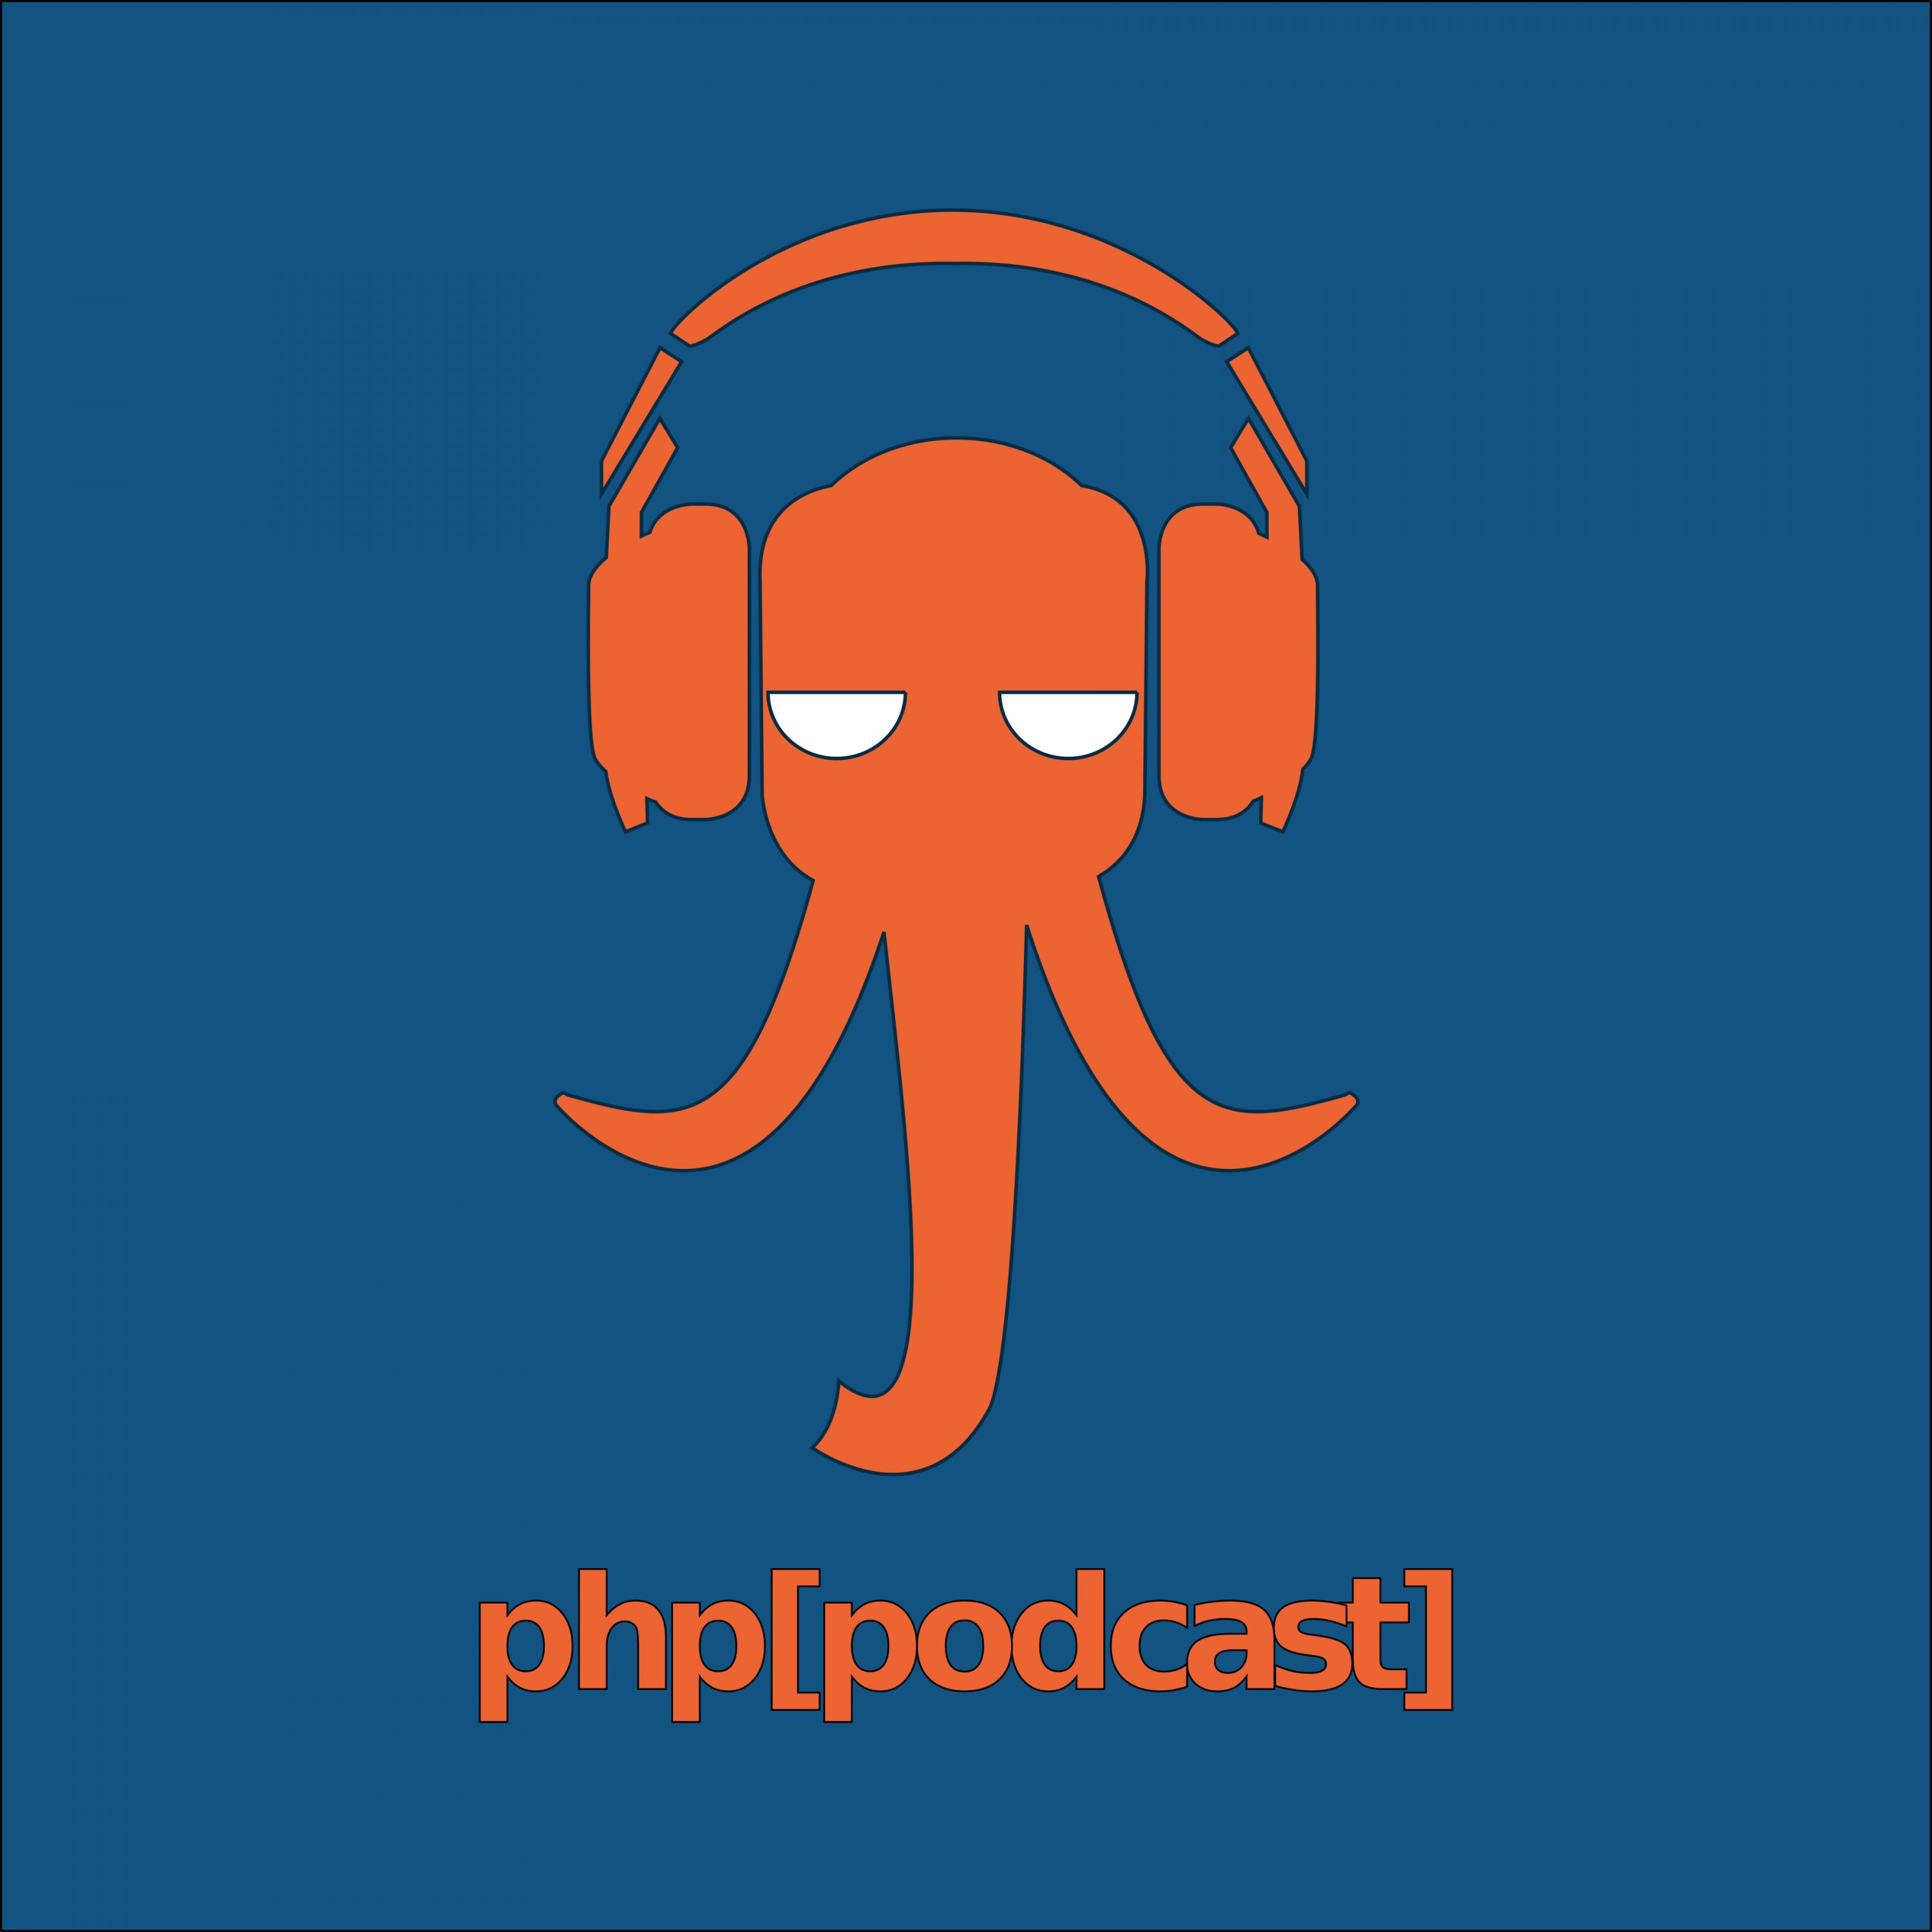 php[podcast] episodes from php[architect]